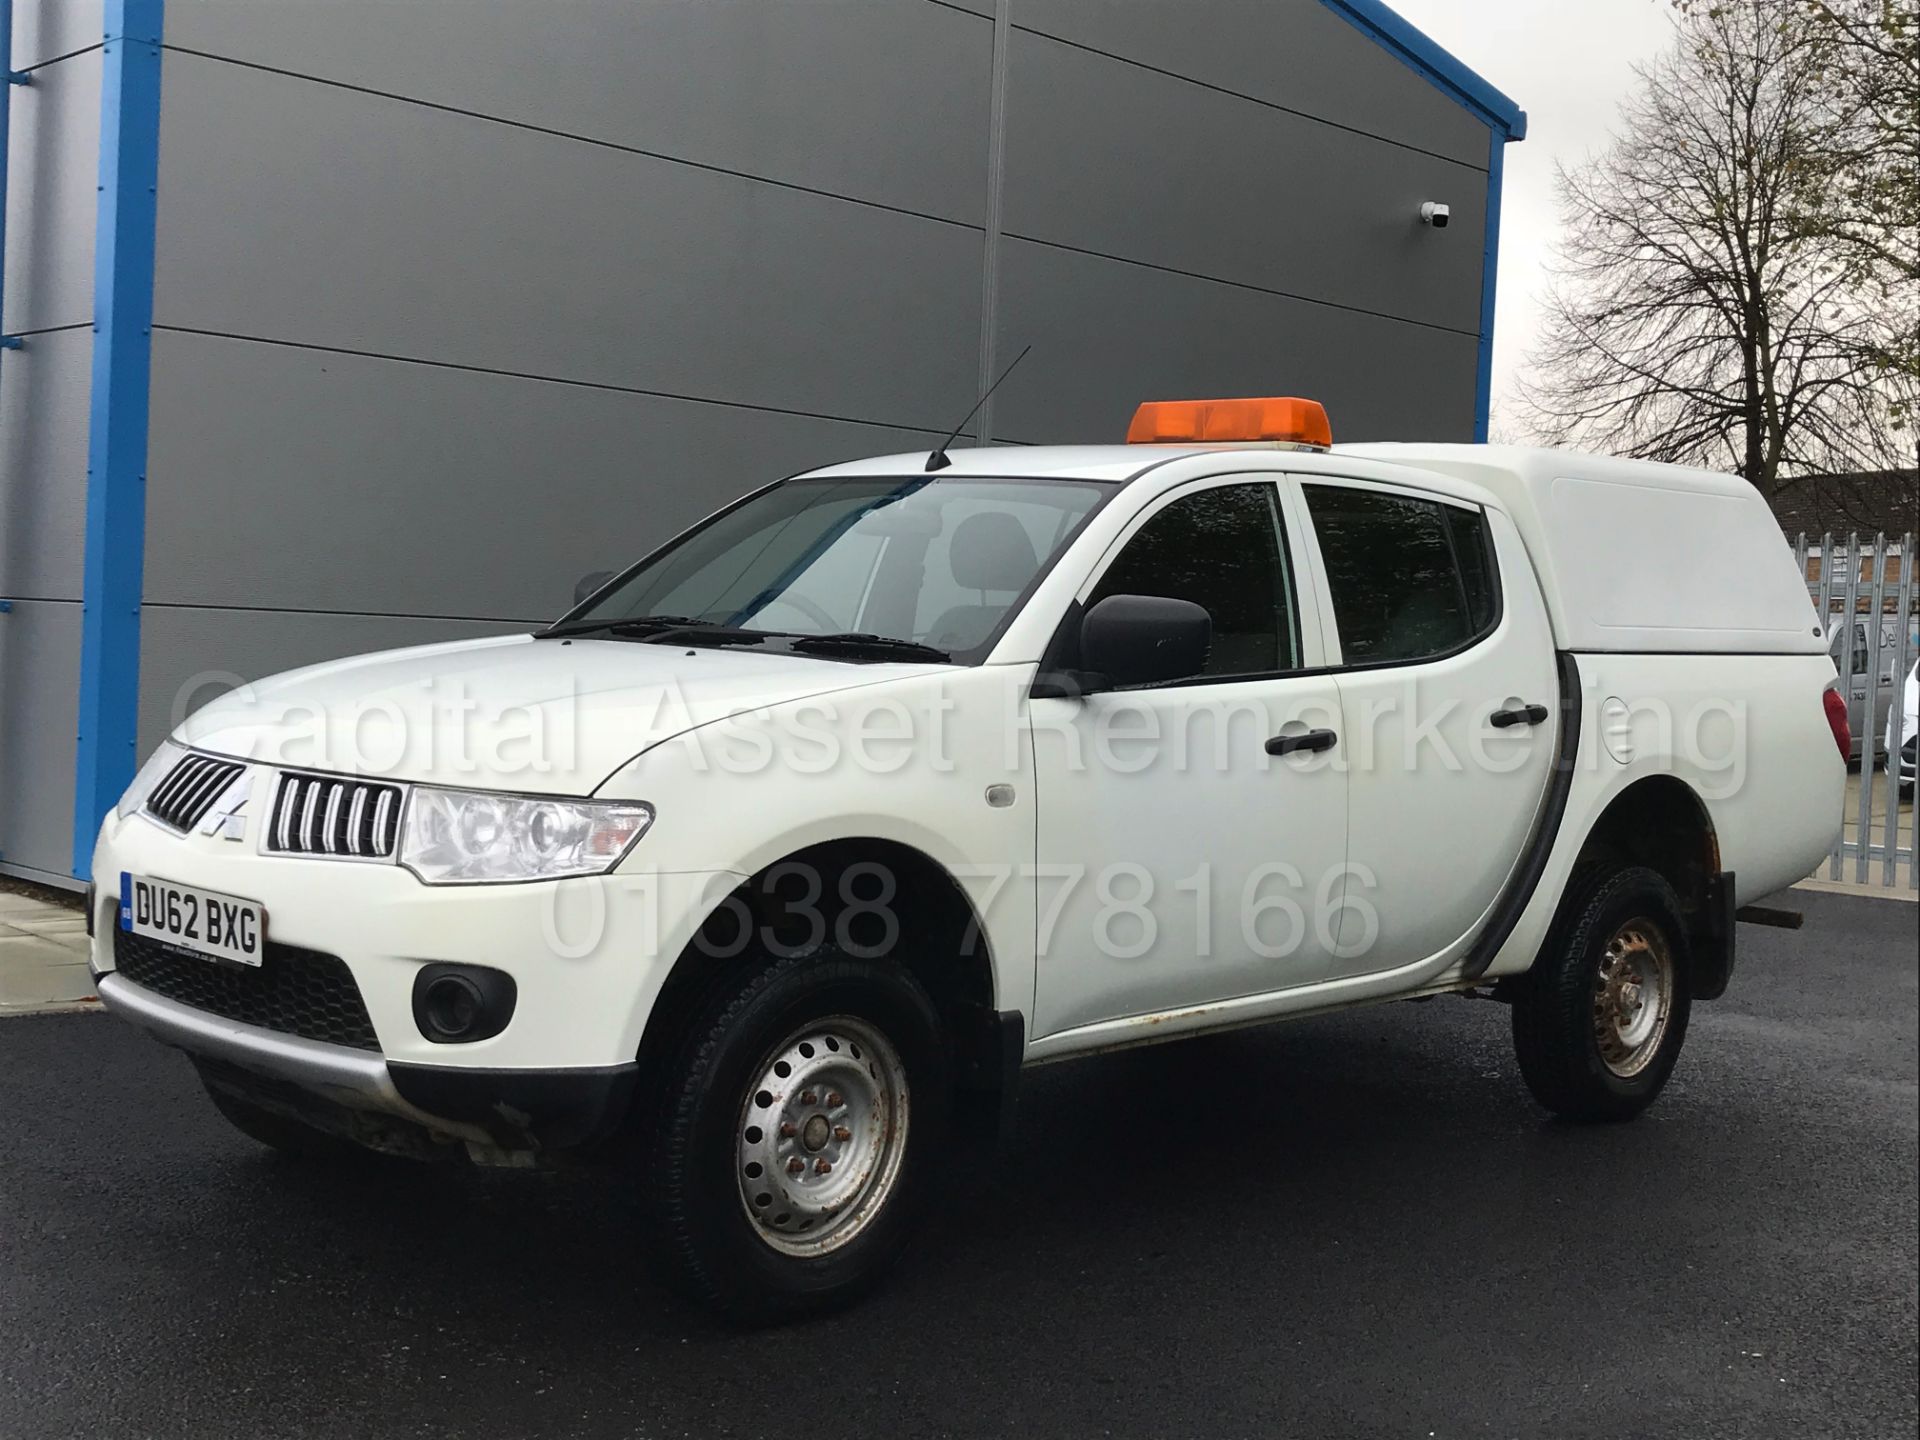 (On Sale) MITSUBISHI L200 DOUBLE CAB PICK-UP (2013 MODEL) '2.5 DI-D - 136 BHP' (1 OWNER) *31K MILES* - Image 2 of 26